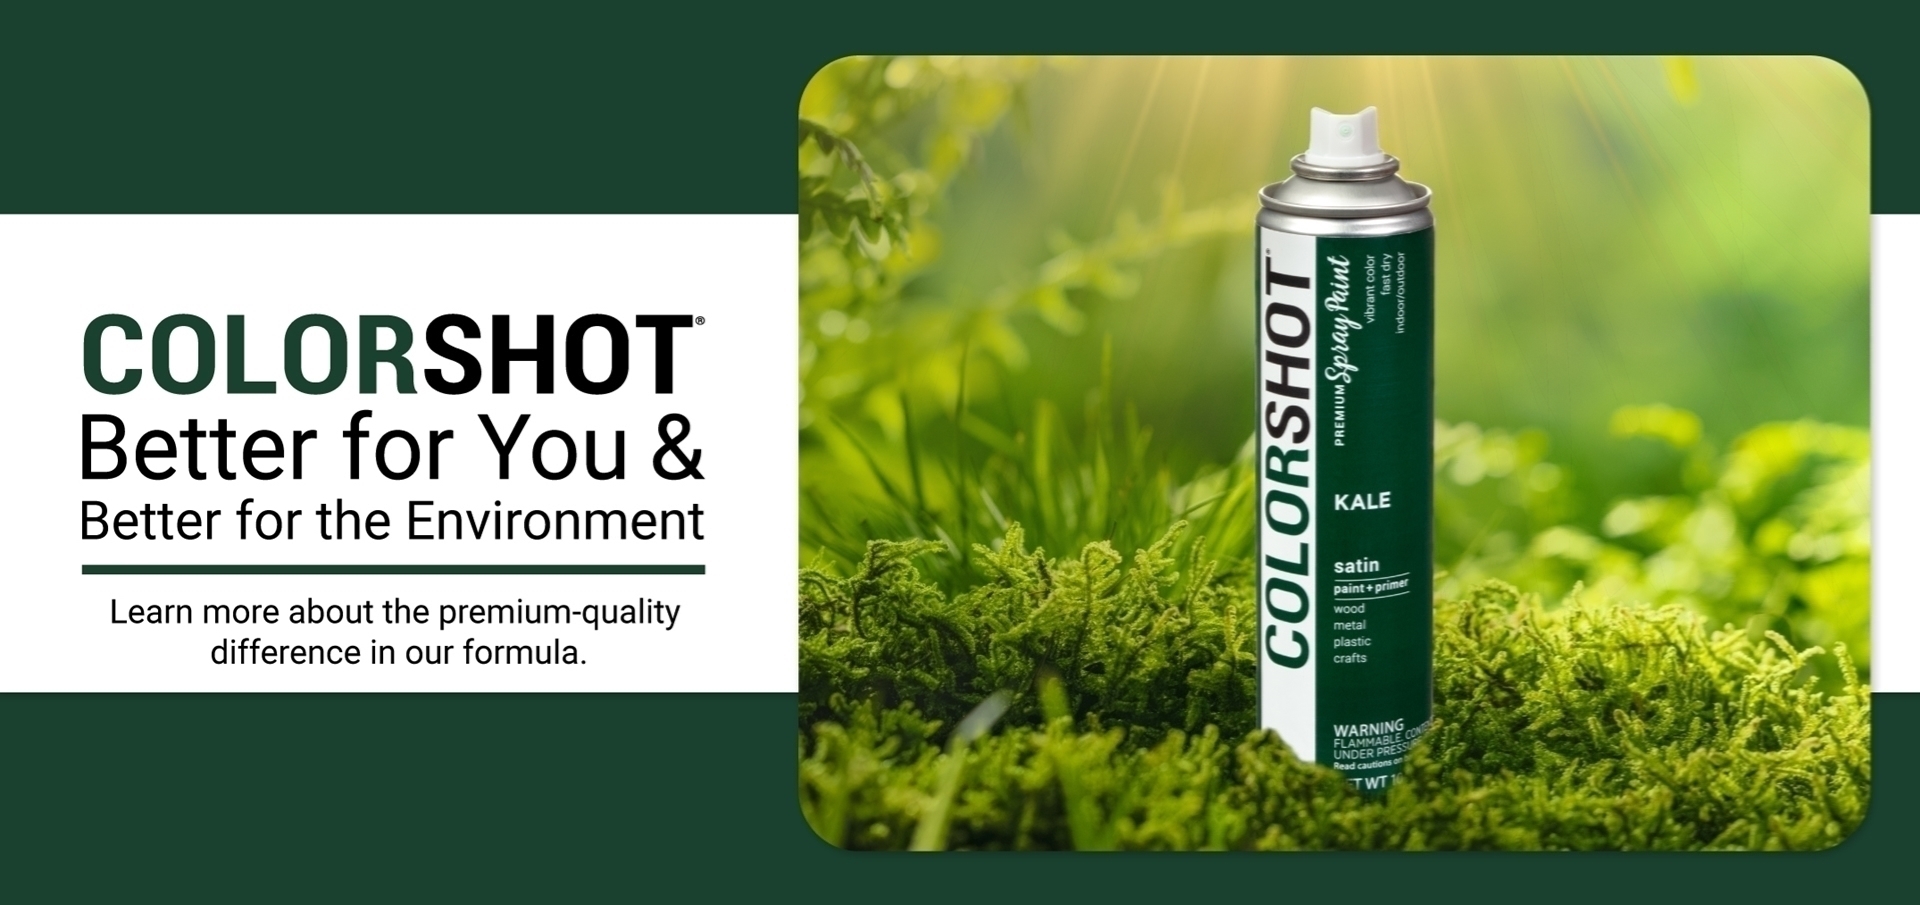 COLORSHOT Better for You, Better for the Environment